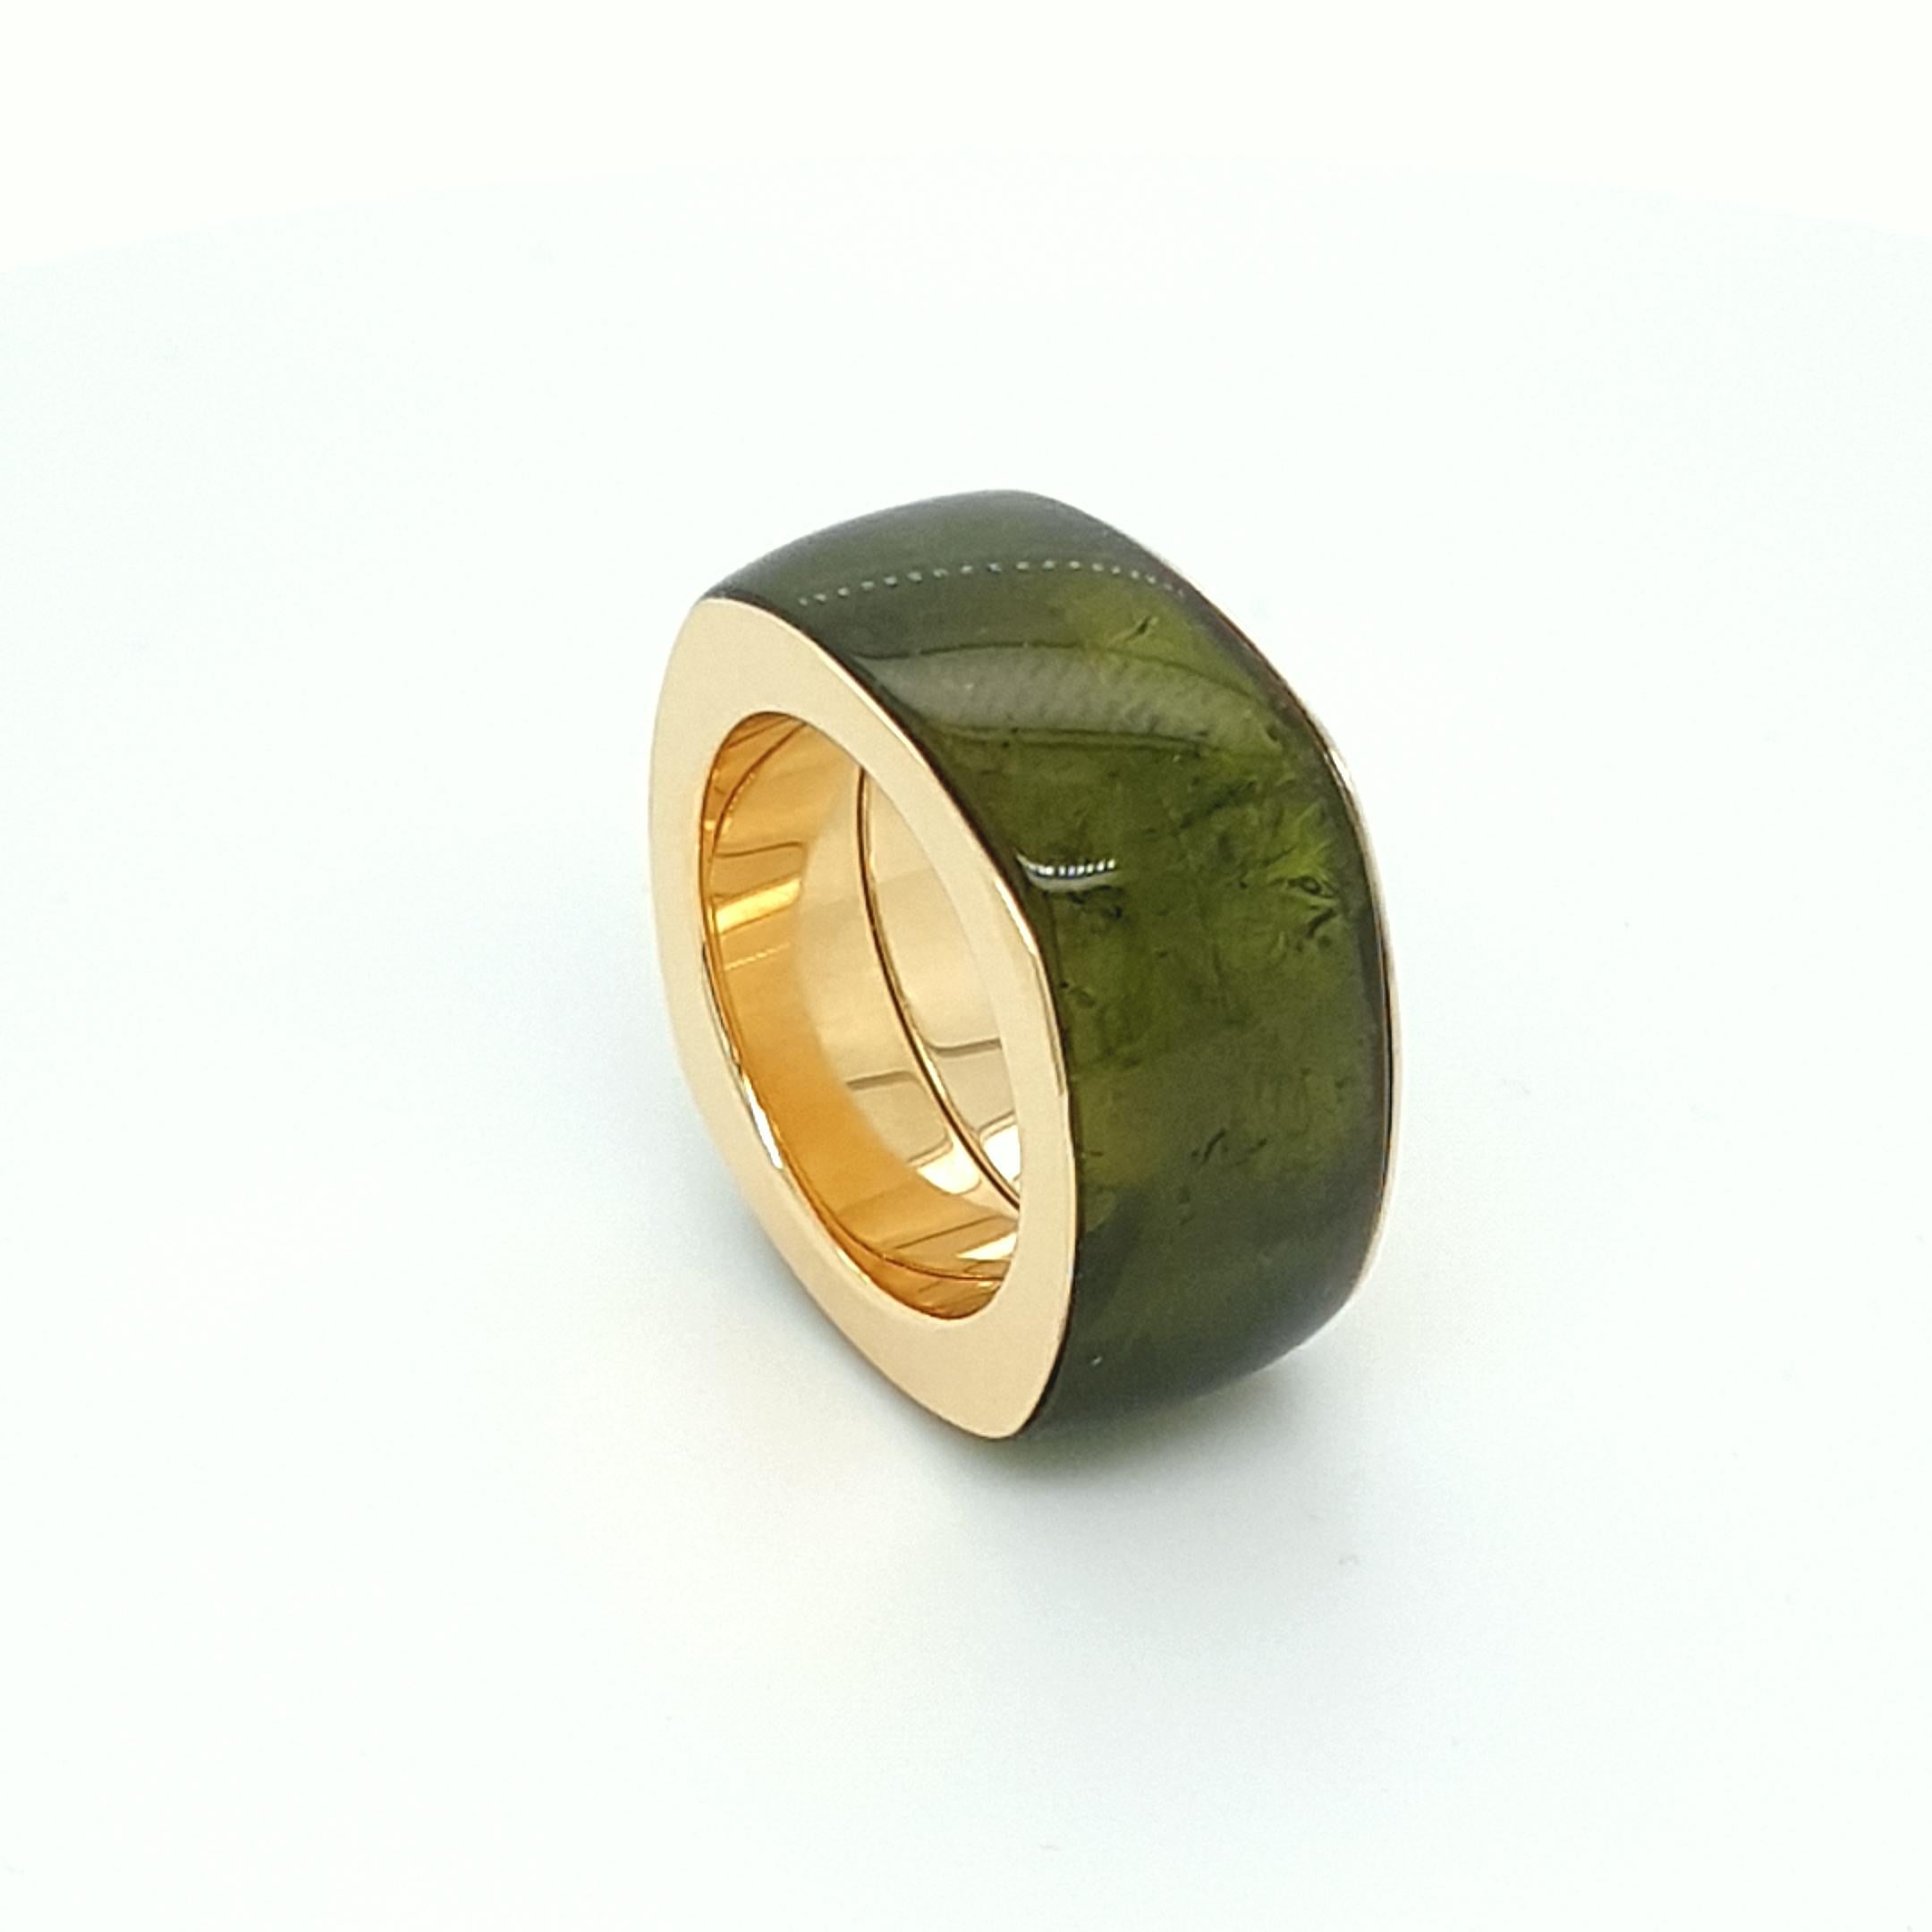 This moss Green Tourmaline Band Ring with 18 Carat Yellow Gold is totally handmade.
Cutting as well as goldwork are made in German quality.
Finding a suitable nice Green Tourmaline where you are able to cut a whole ring out of one piece is very